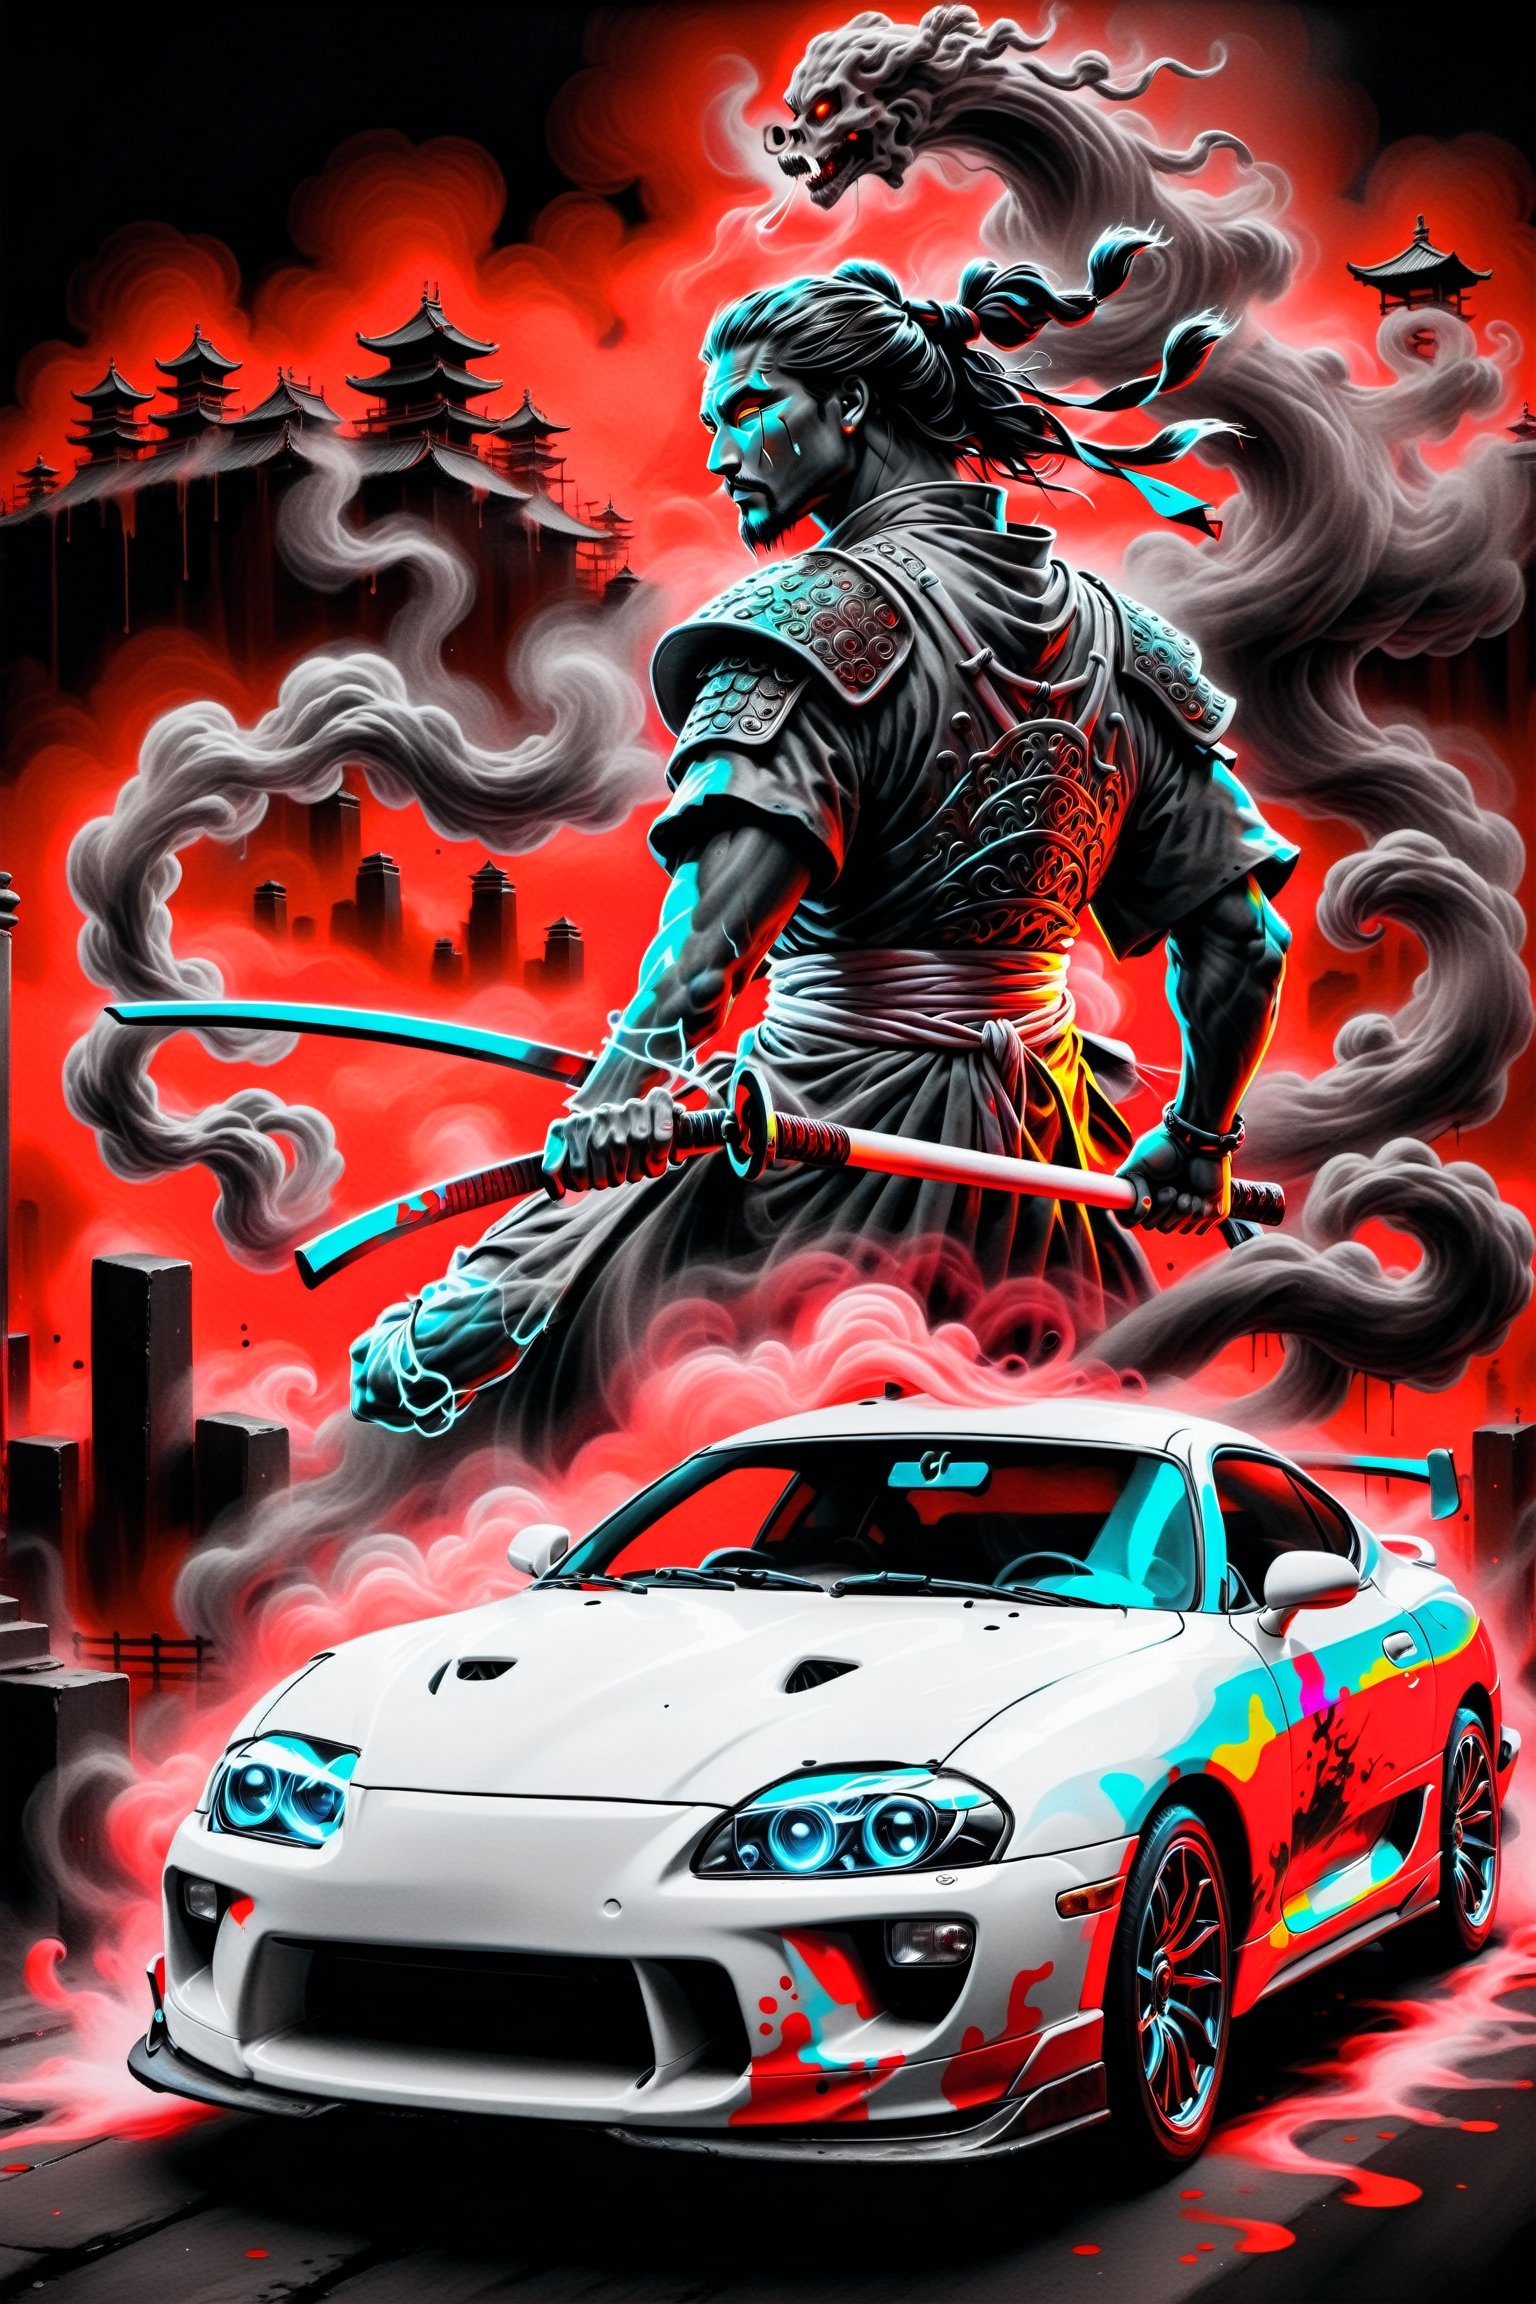 neon street art Toyota Supra car with smoke and the ghost of a samurai warrior with a blood red background, neon vivid colors,SelectiveColorStyle